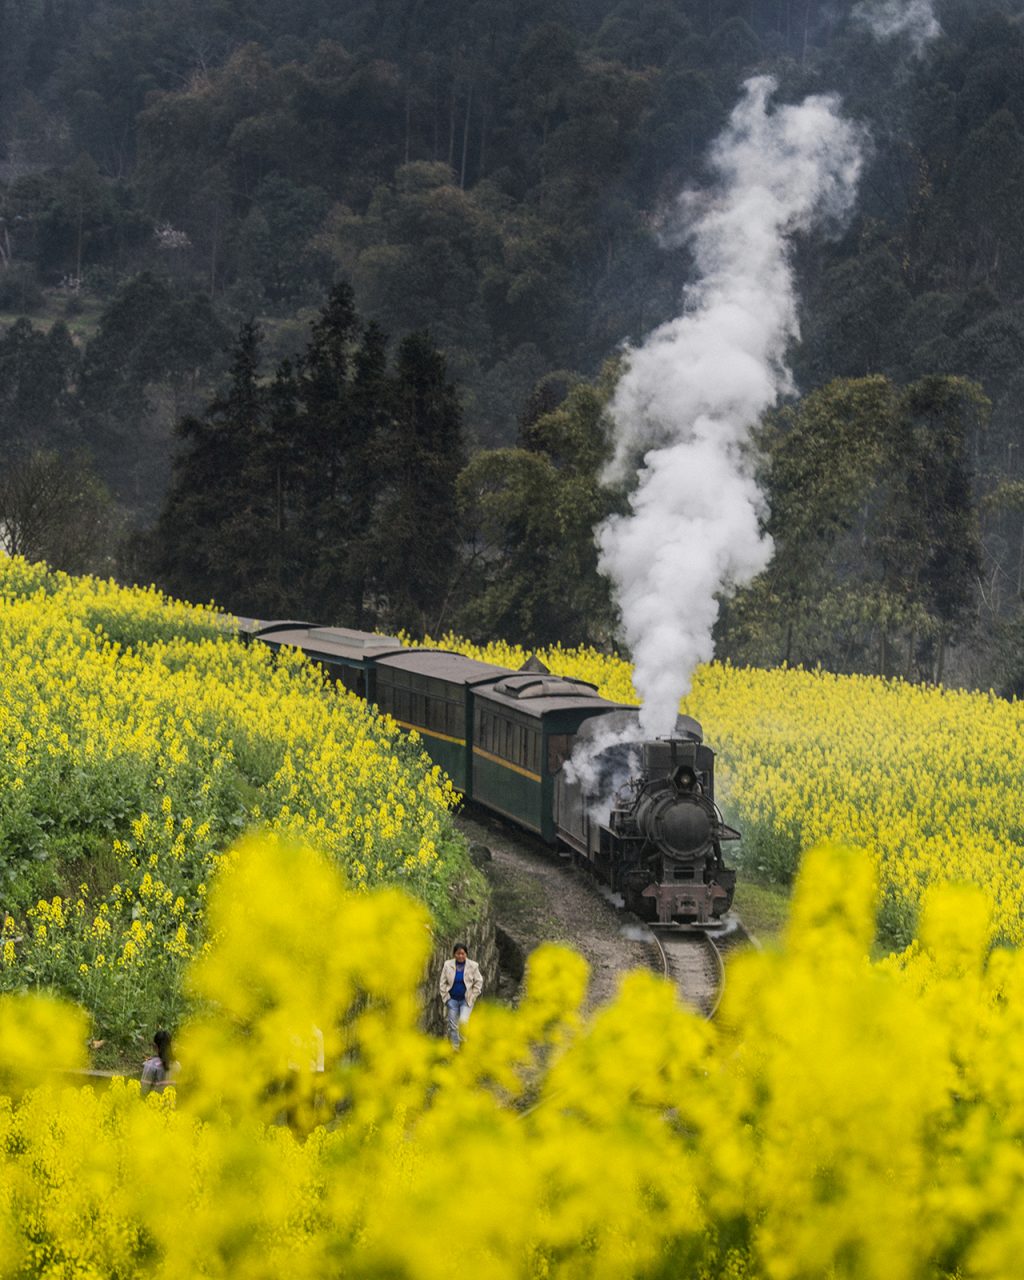 Rapeseed fields in bloom along the steam train’s route